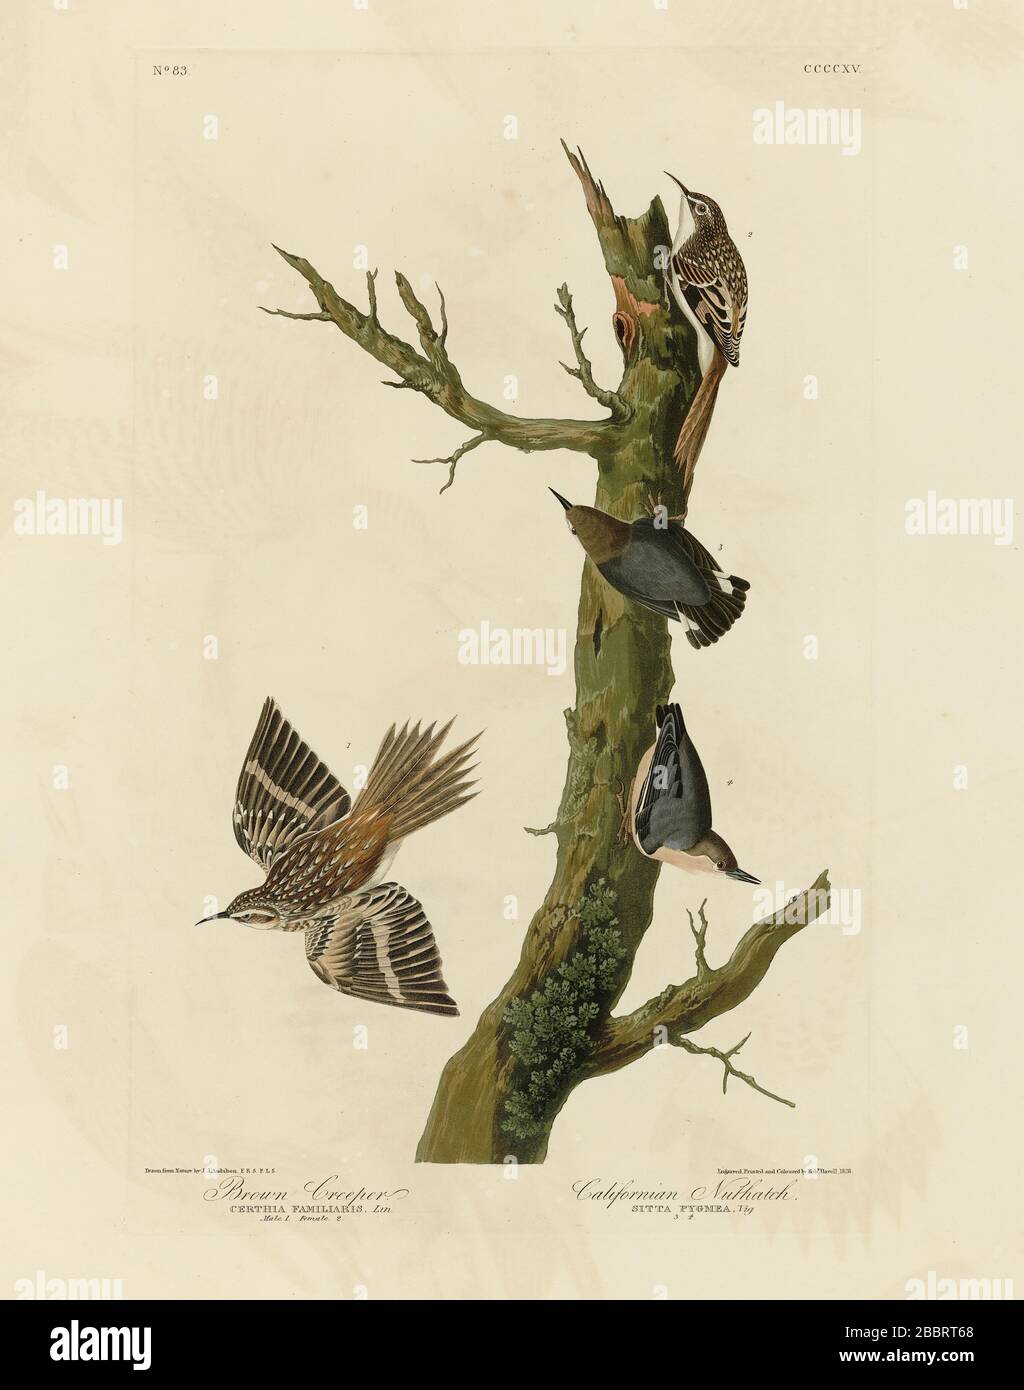 Plate 415 Brown Creeper and Californian Nuthatch (Pygmy Nuthatch), The Birds of America folio (1827–1839) by John James Audubon Stock Photo